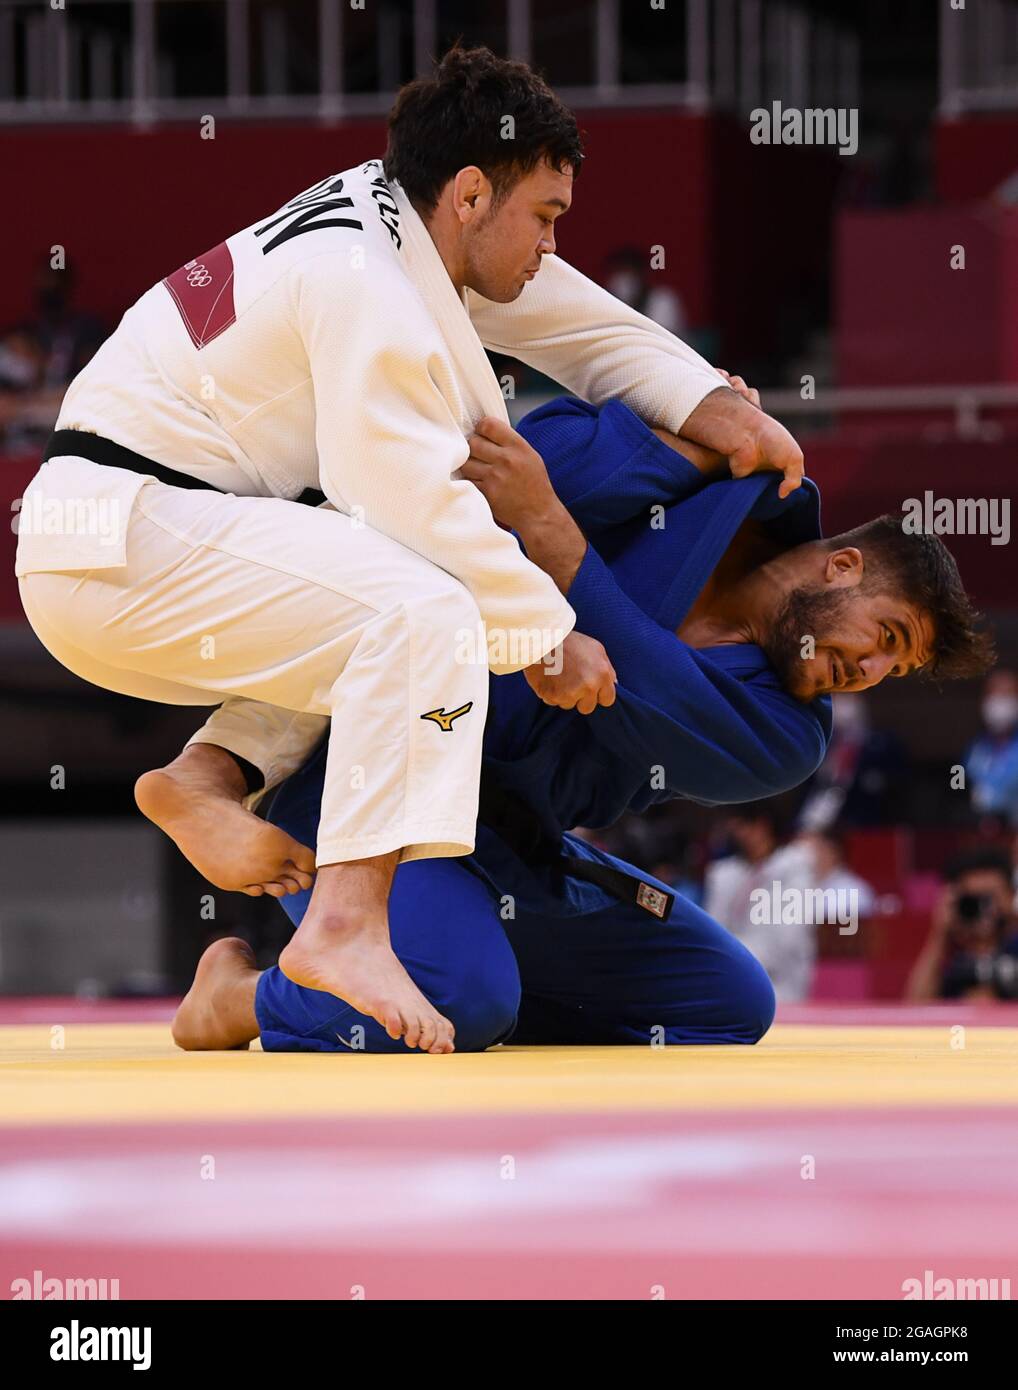 Tokyo 2020 Olympics - Judo - Mixed Team - Quarterfinal - Nippon Budokan - Tokyo, Japan - July 31, 2021. Aaron Wolf of Japan in action against Johannes Frey of Germany REUTERS/Annegret Hilse Stock Photo